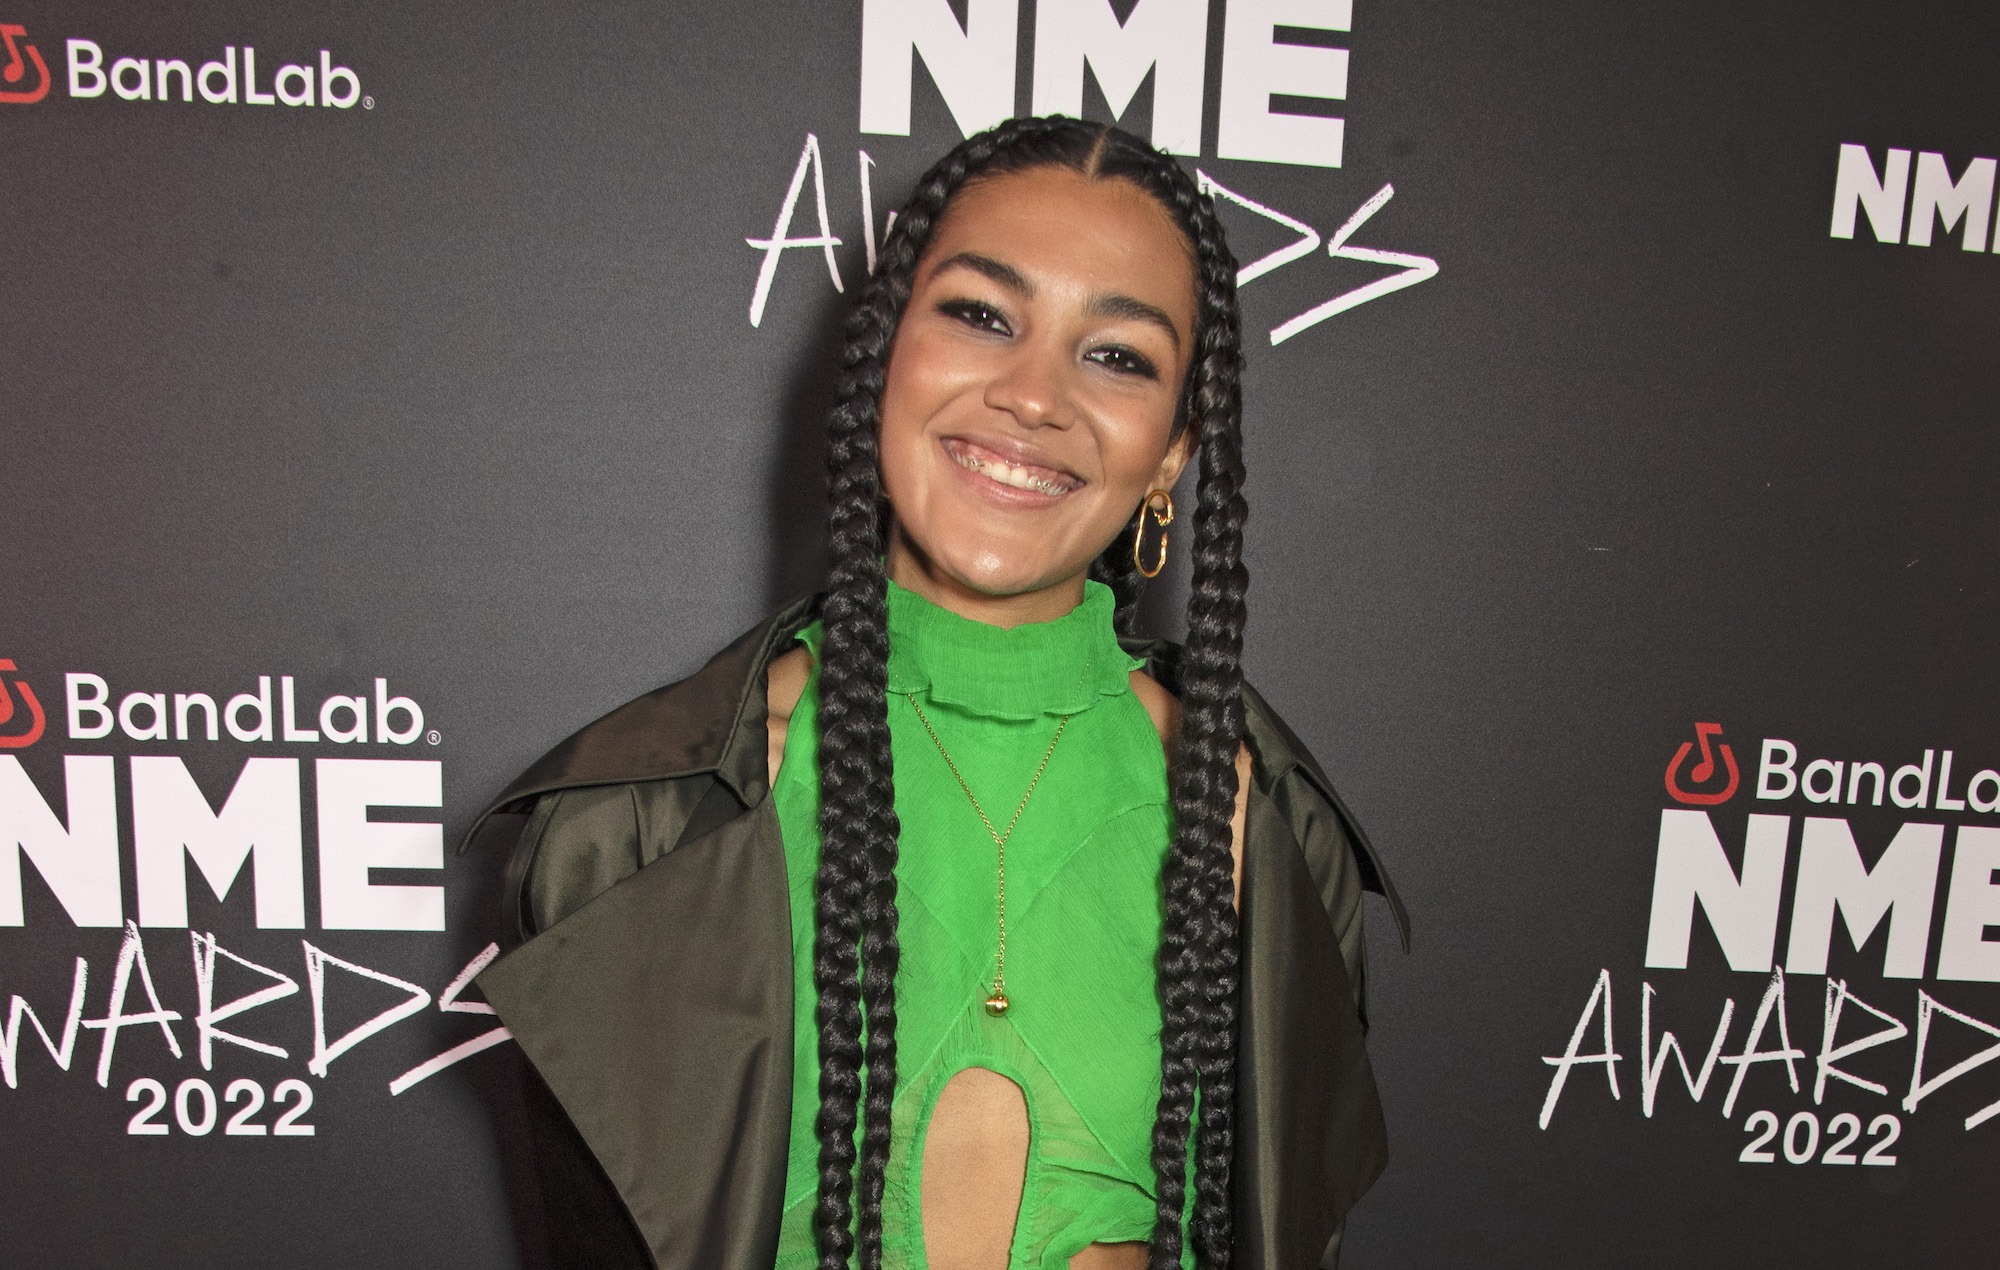 Olivia Dean teases debut album at BandLab NME Awards 2022: “I’m trying to draw on my heritage”